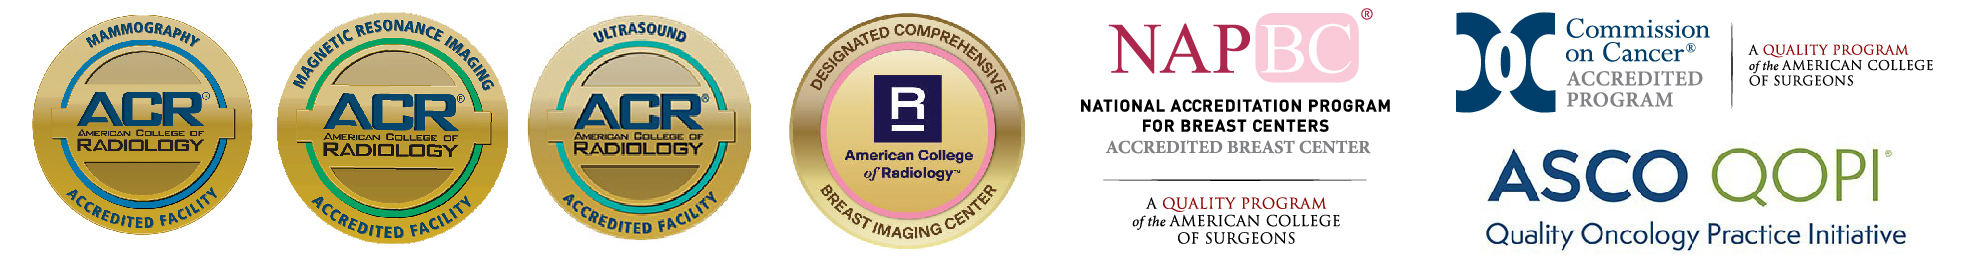 American College of Radiology, National Accreditation Program for Breast Cancer, Commission on Cancer, and ASCO Quality Oncology Practice Initiative accreditation logos